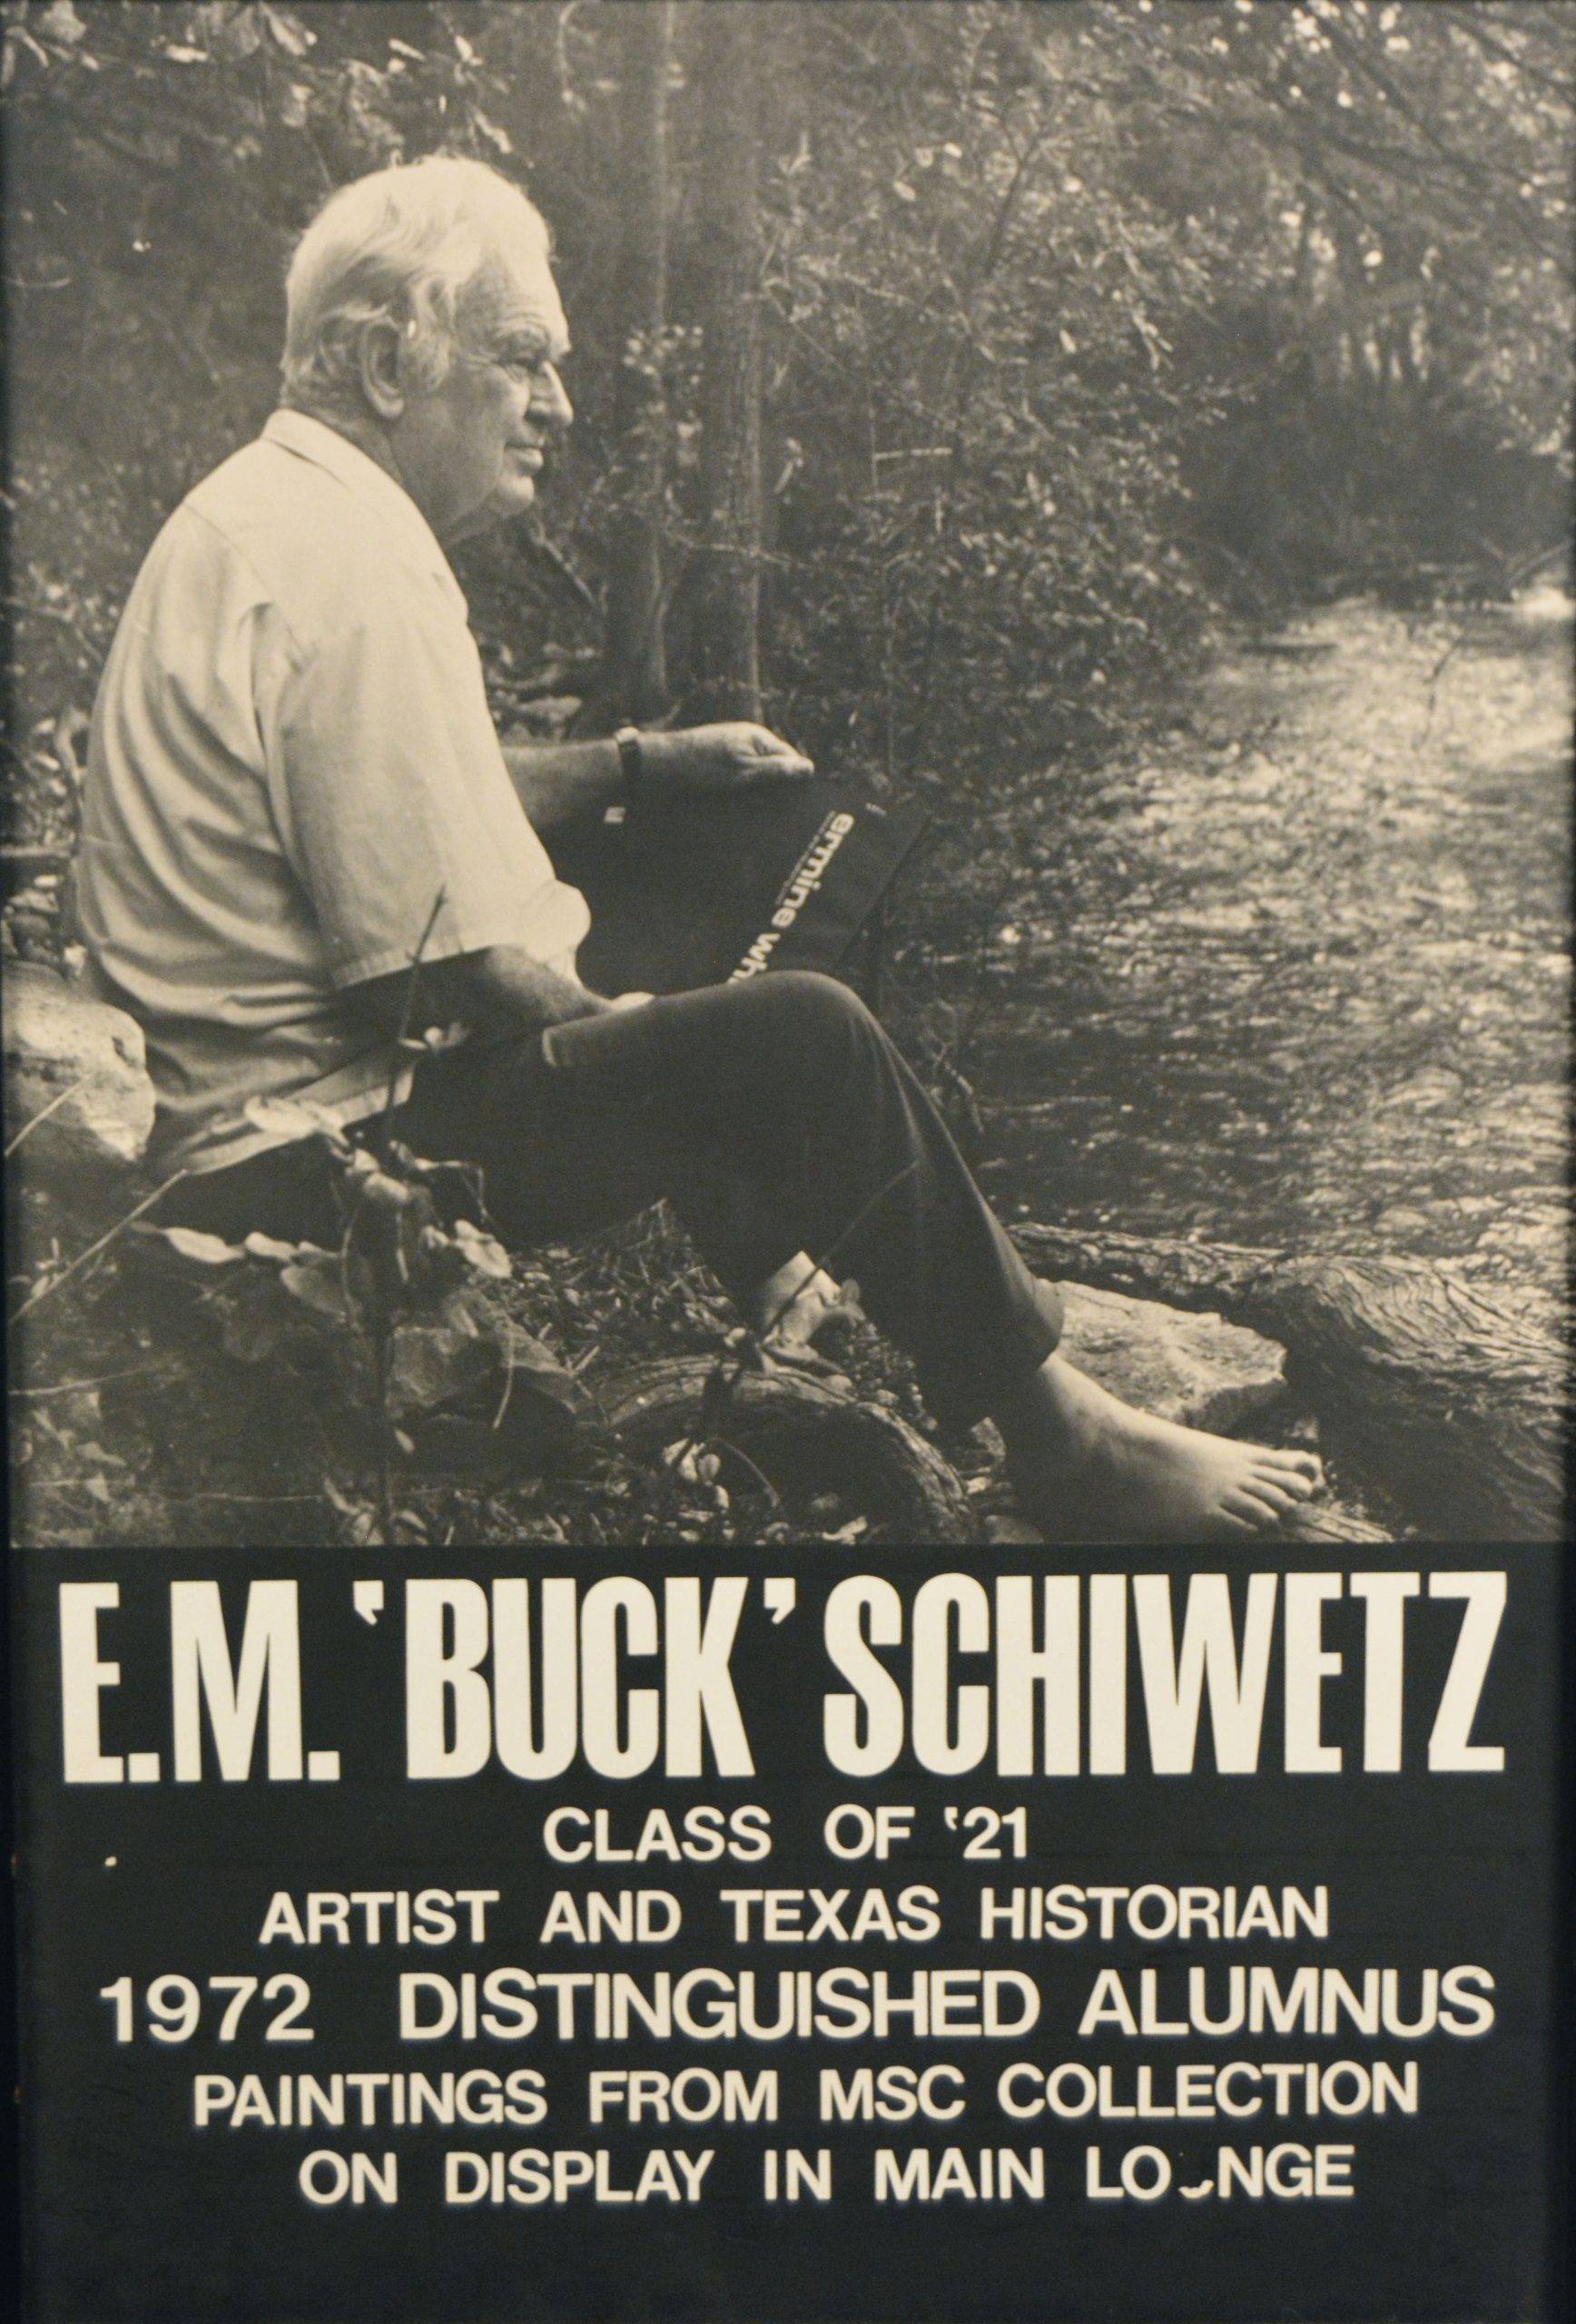 Advertising poster for a 1976 gallery exhibition. Black and white photo of Buck Schiwetz seated bare foot next to a riverbank facing right. Text below reads E.M. ‘Buck’ Schiwetz, Class of ’21, 1972 Distinguished Alumnus, Paintings from MSC Collection on Display in Main Lounge.